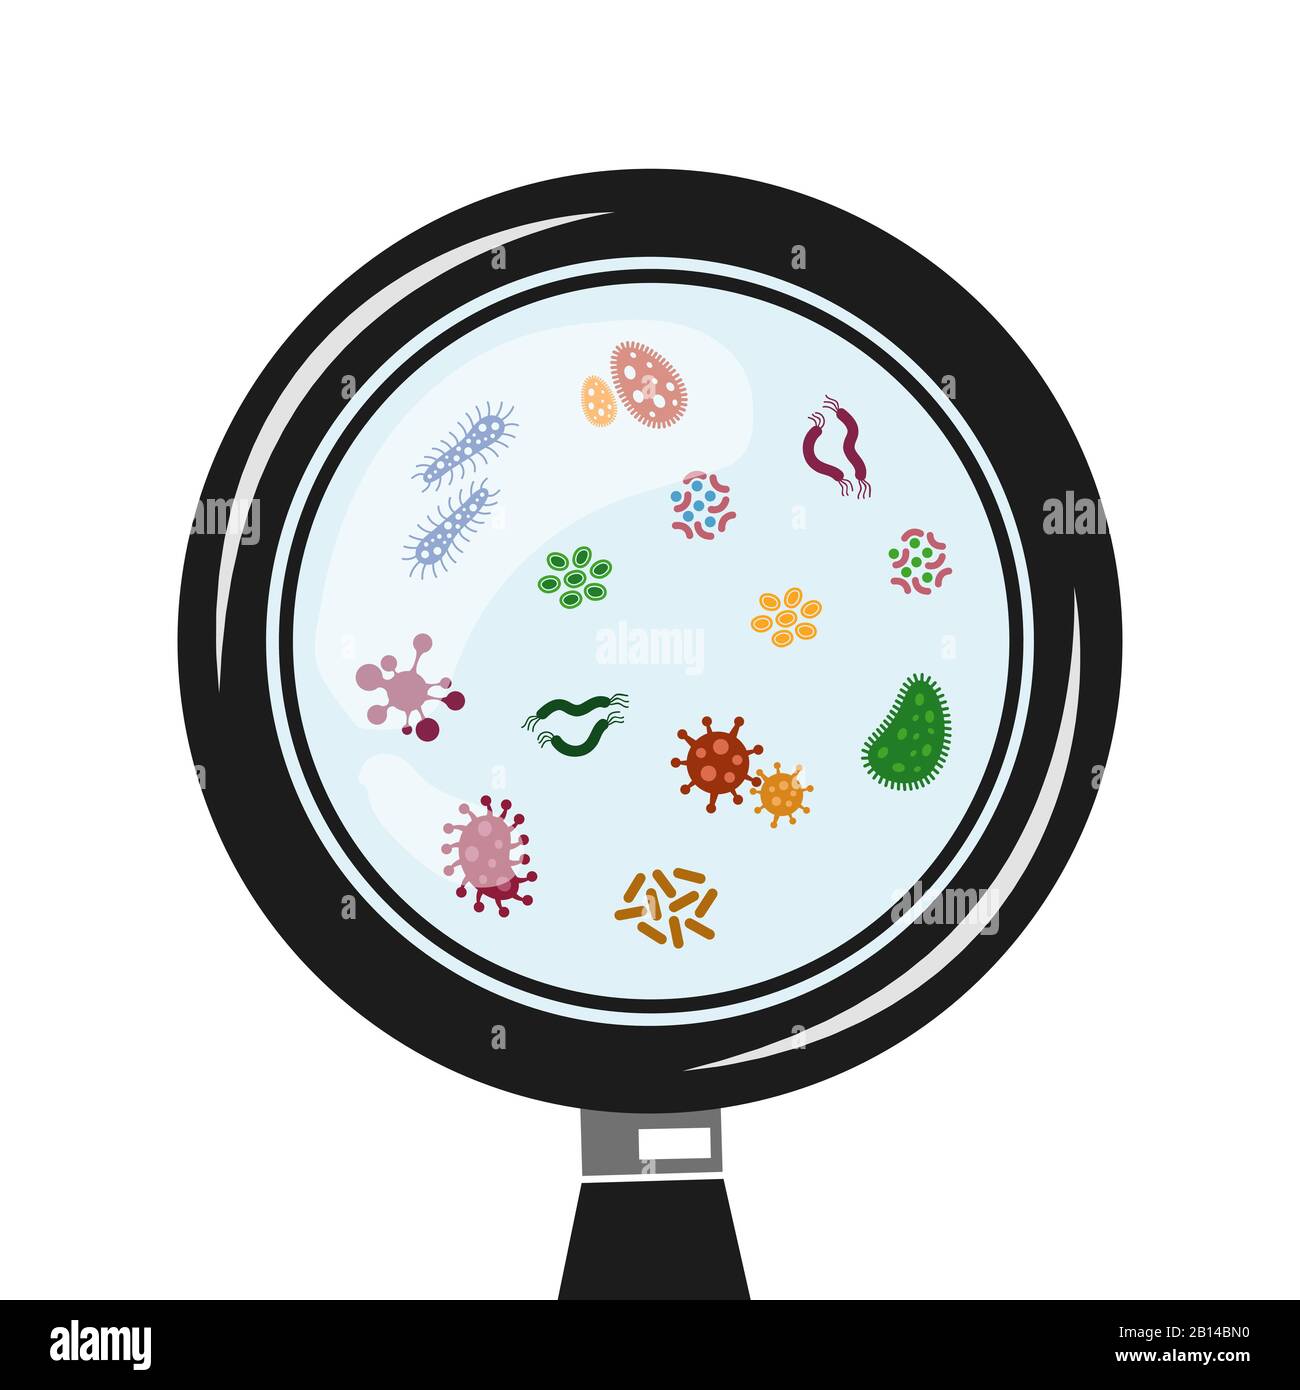 Viruses and microbes in the magnifier vector. Infection and illness illustration Stock Vector